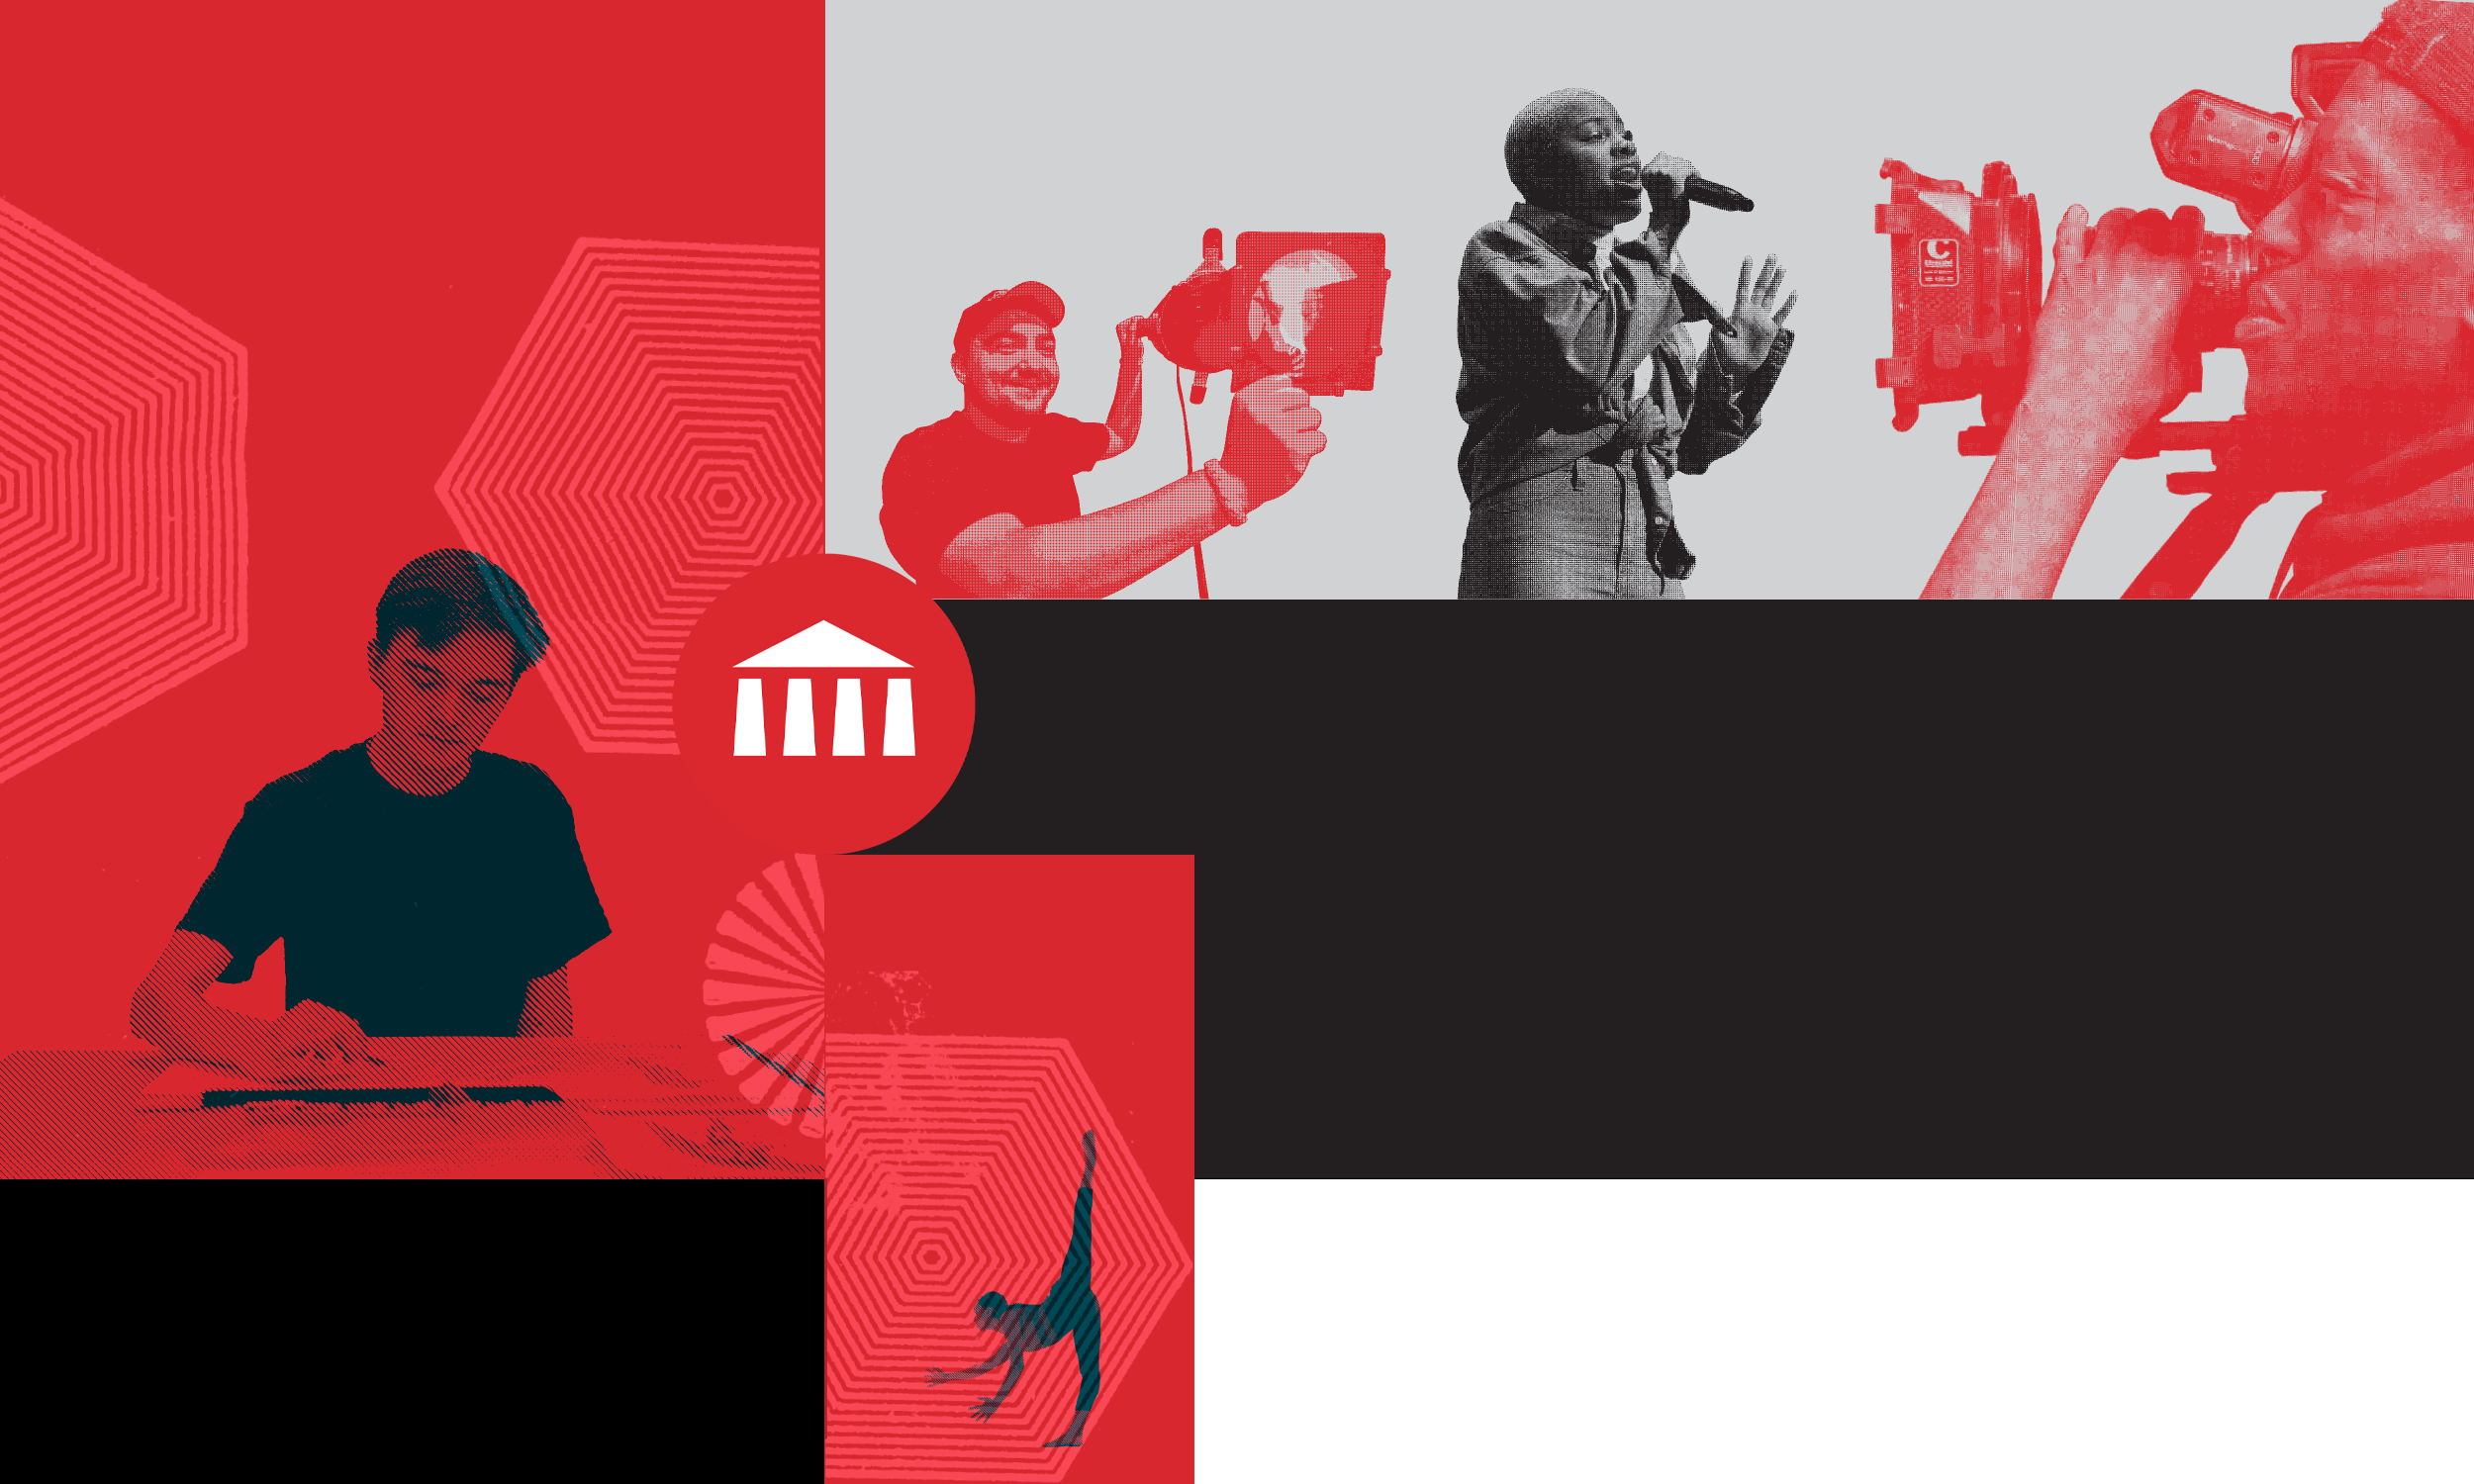 A graphic image of a singer, videographer, lighting designer, drawer and dancer with red, black and grey hues